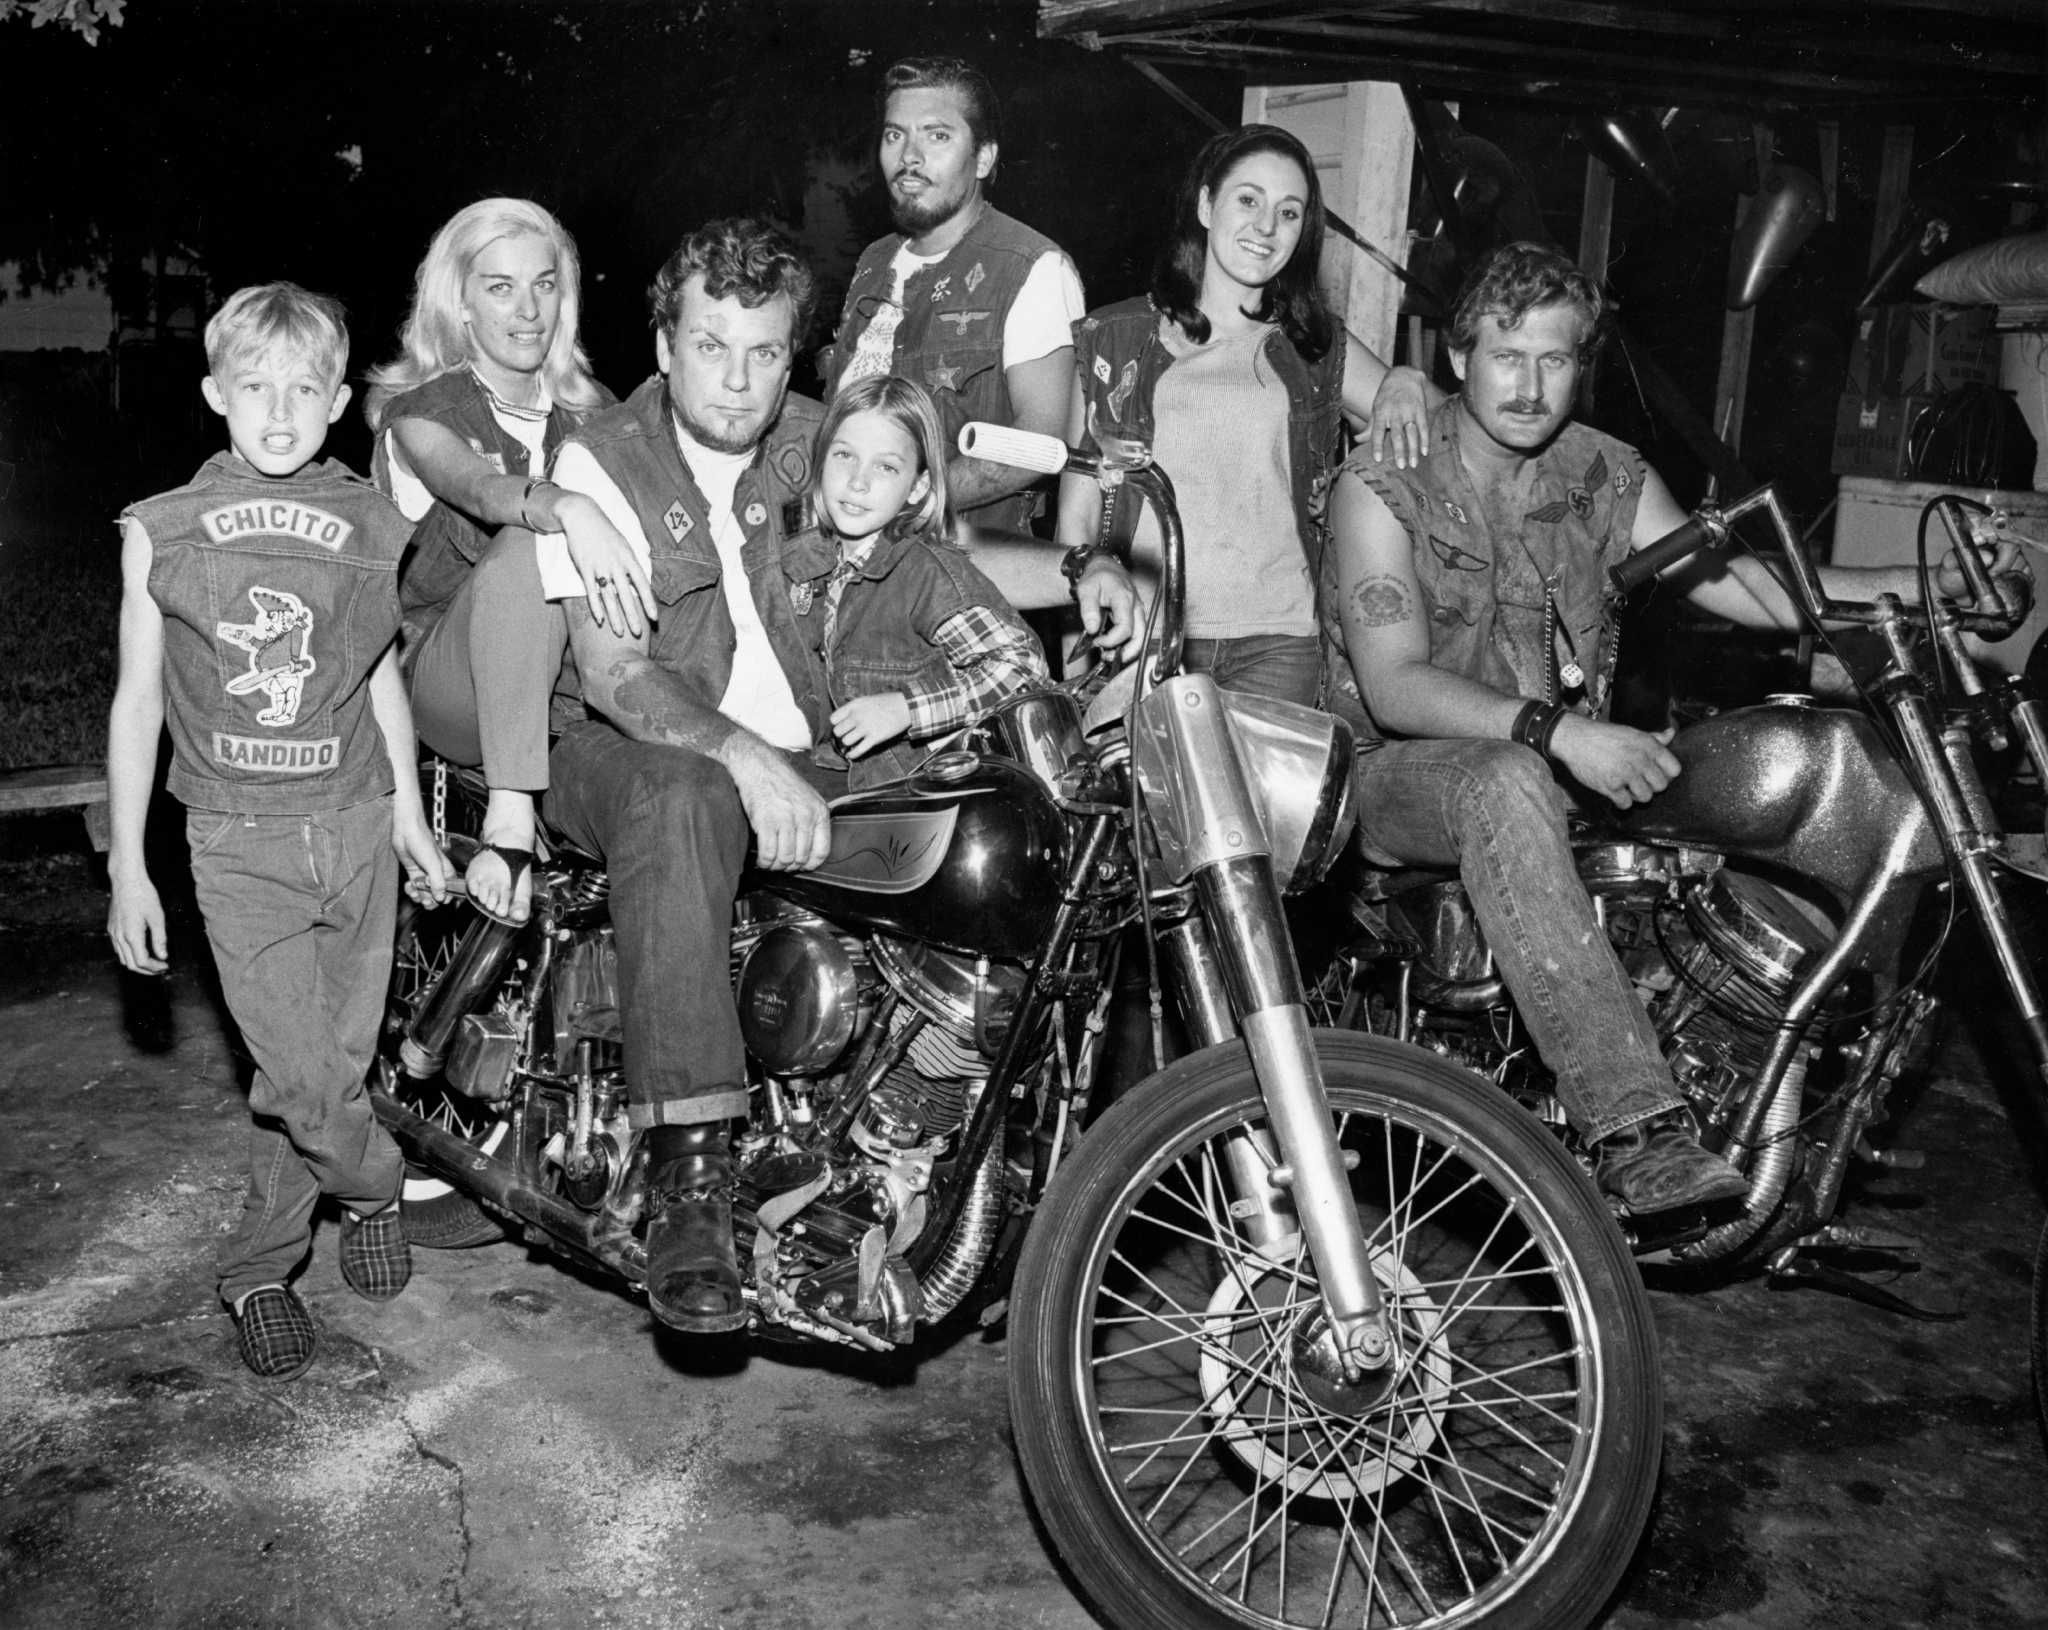 Bandidos Motorcycle Club president Don Chambers with family and friends. (L-R) Chambers family: Edward, Jo, Don and Sherri with Louis Bonilla, Barbara Pyros, and Jerry Pearce.